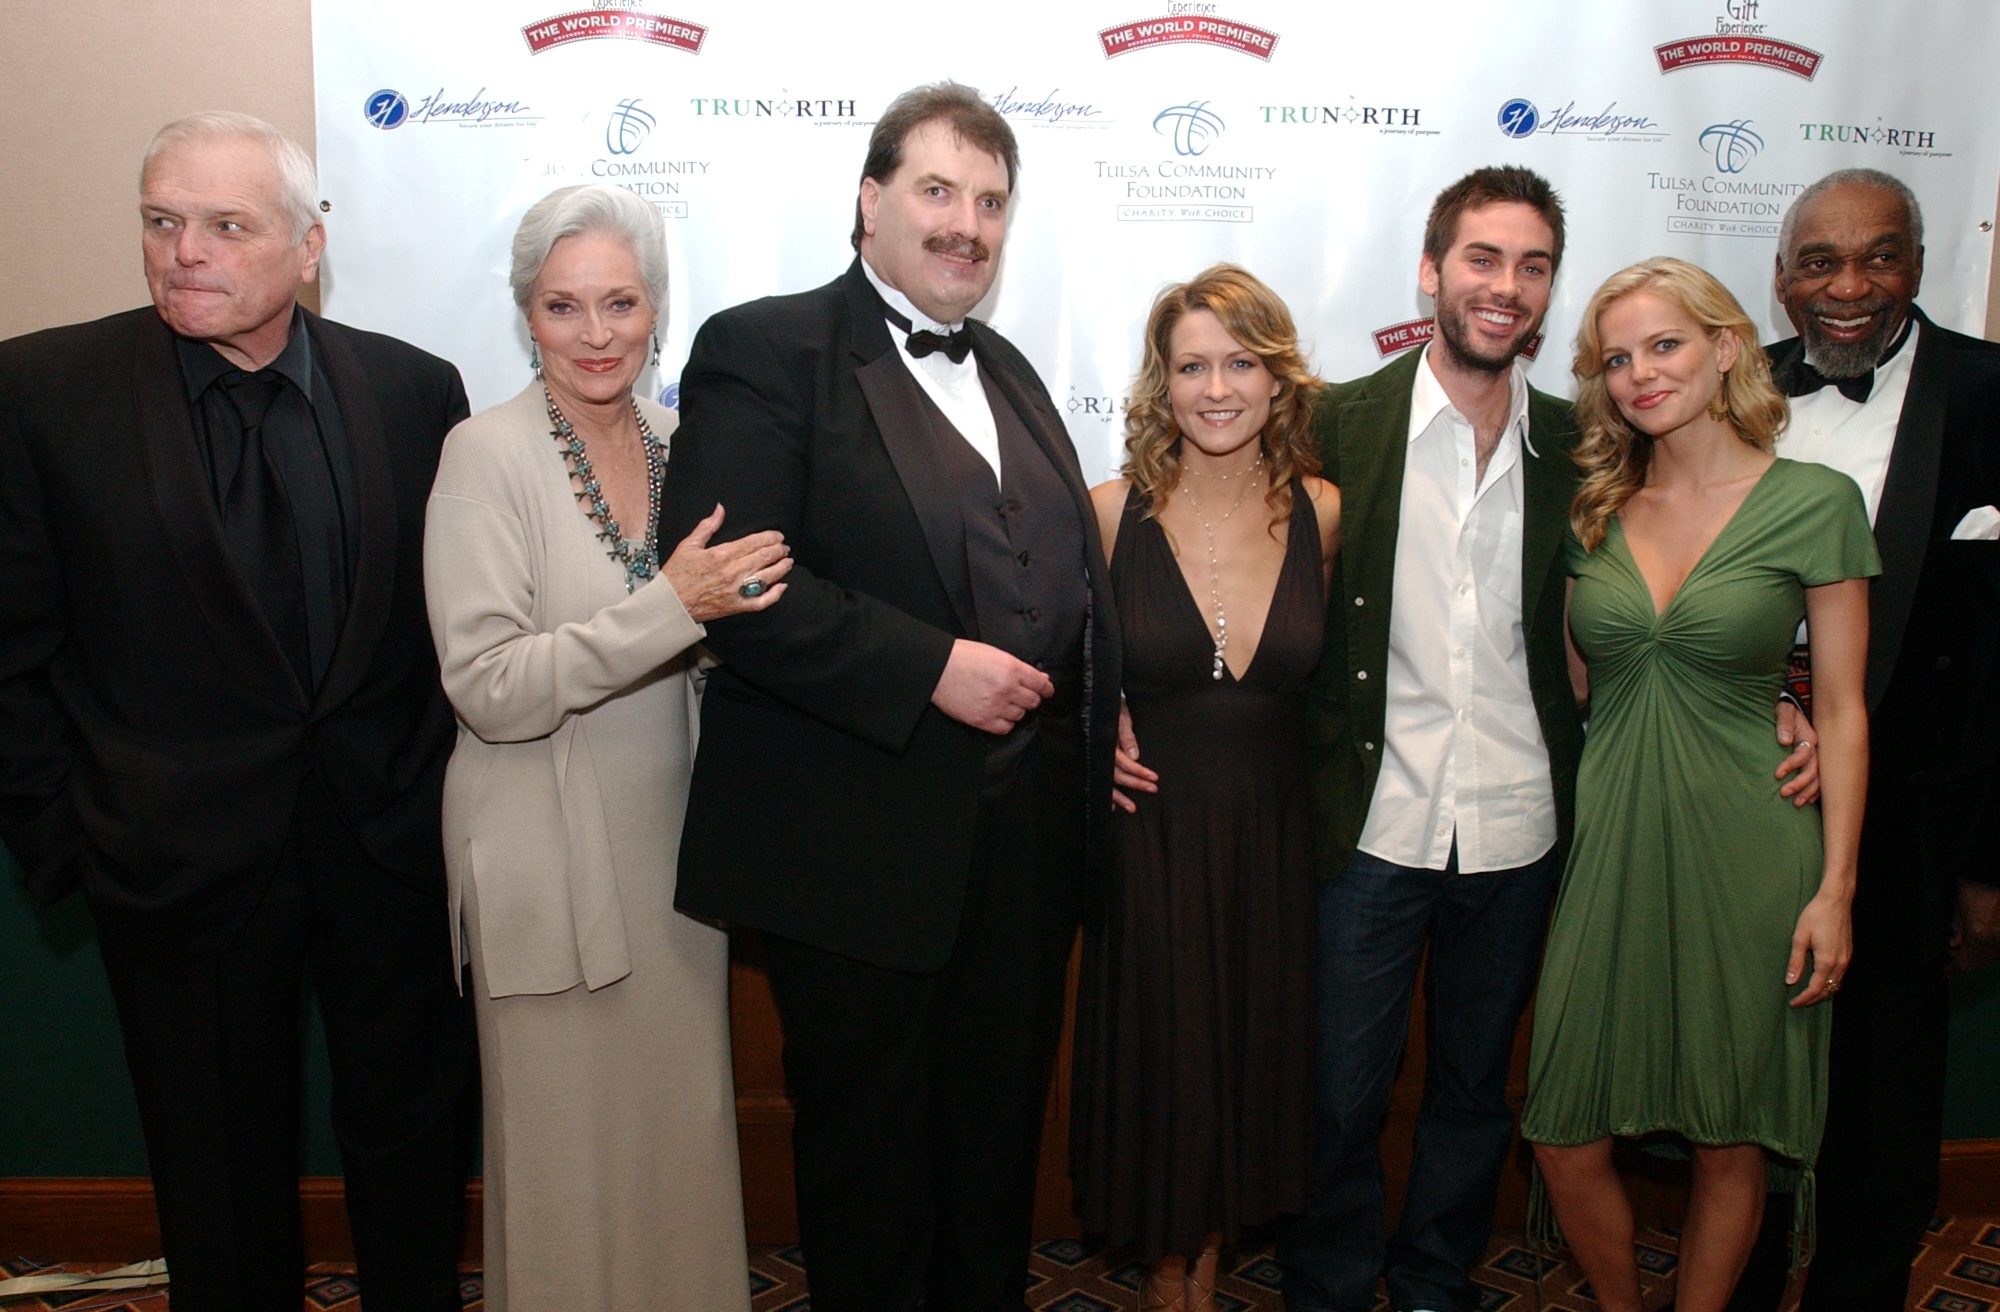 Jim Stovall with the cast from The Ultimate Gift